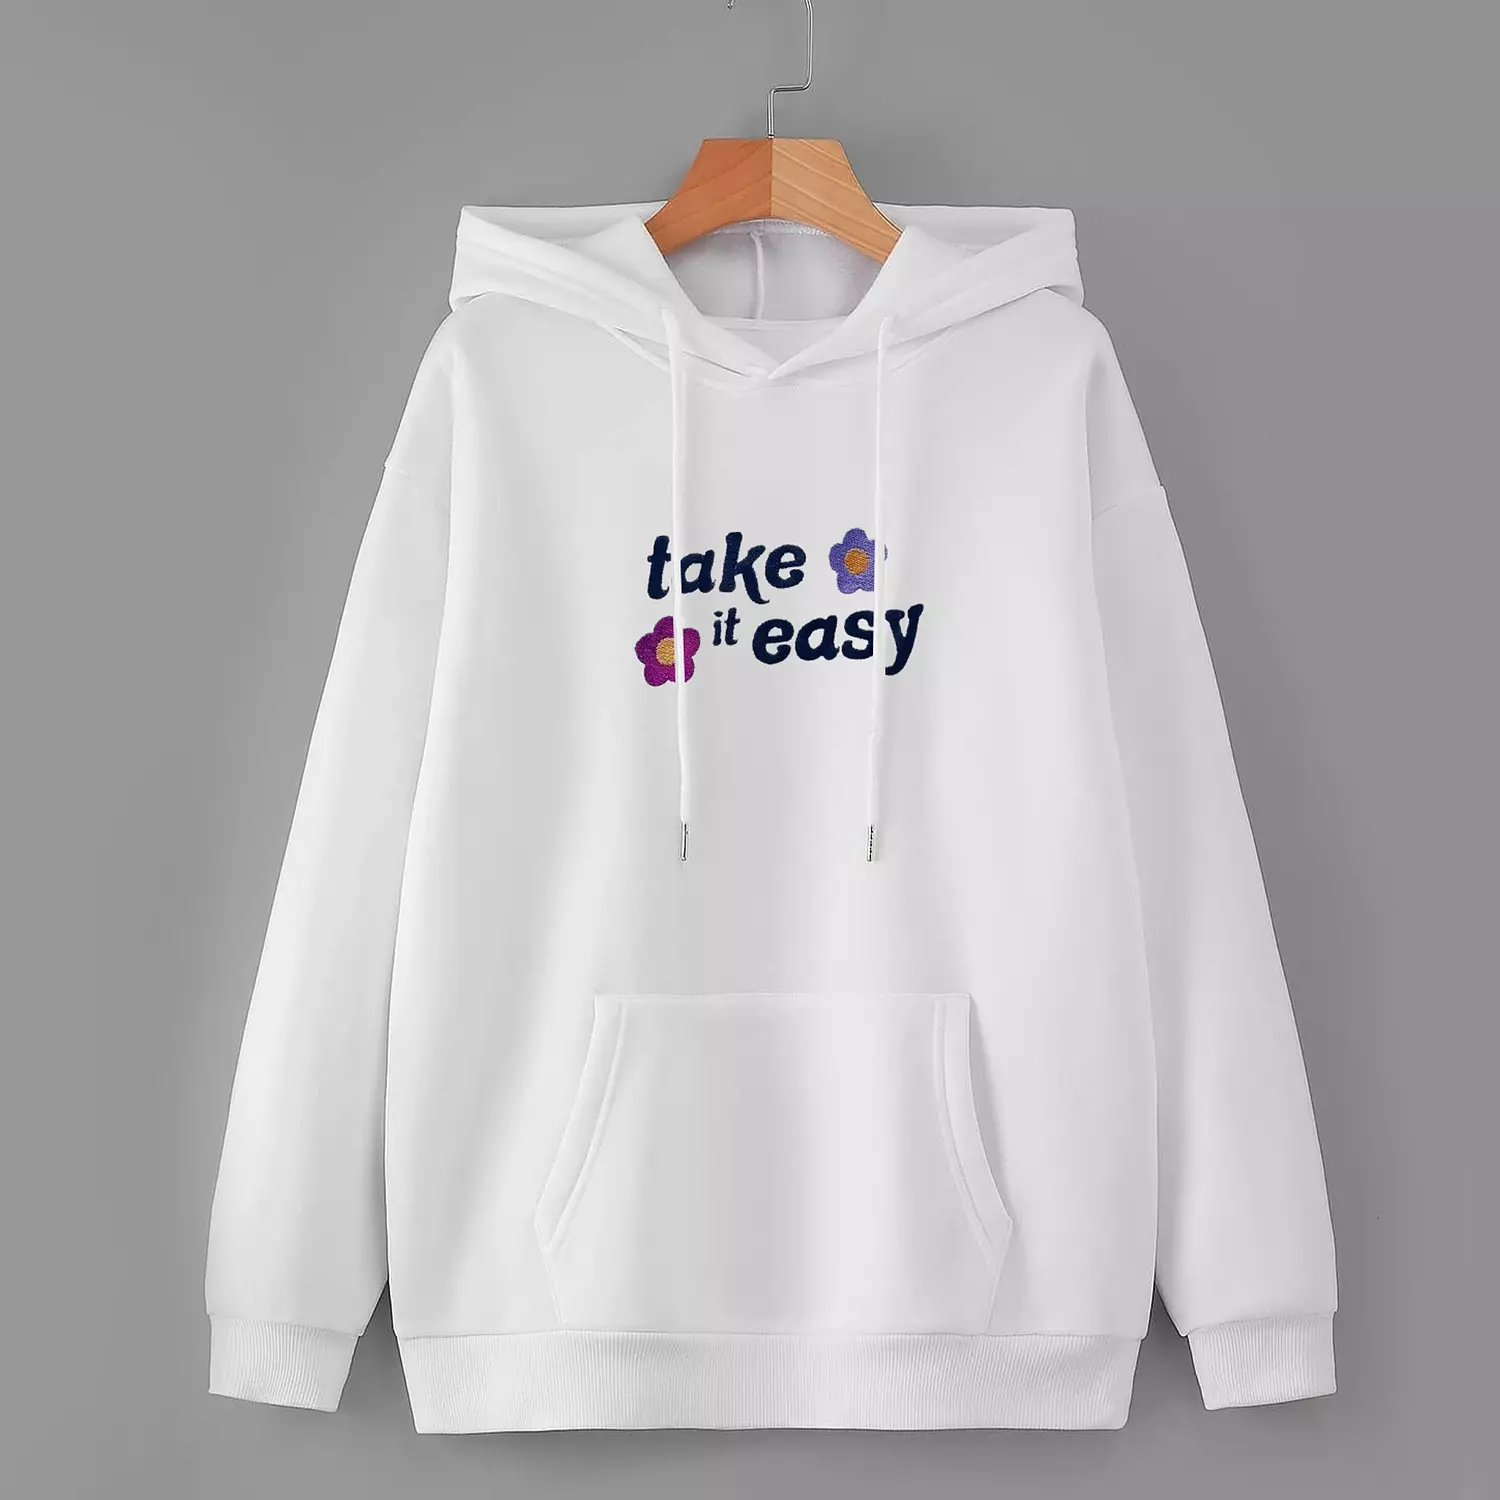 Ho Holland - Women Hoodie - White ( Take it east )  hover image